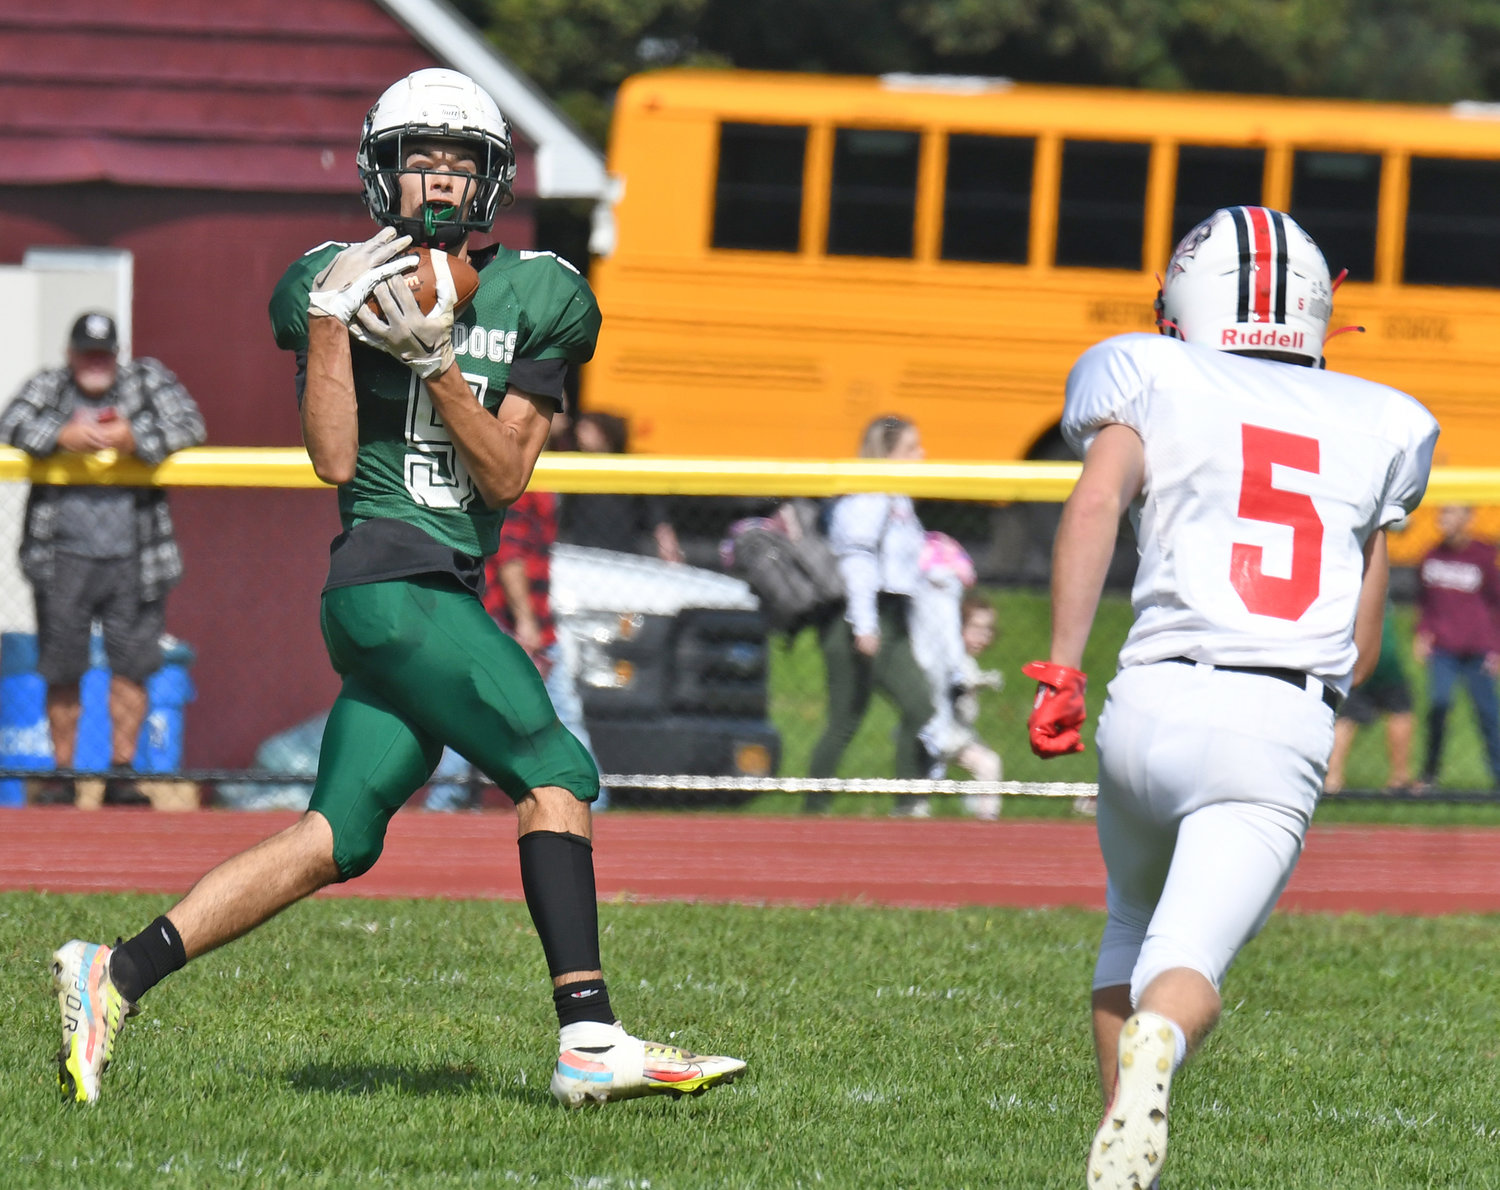 Westmoreland/Oriskany's Cameron Rautenstrauch catches a long pass to set up a touchdown on Saturday afternoon against Vernon-Verona-Sherrill at Bernie Block Field in Oriskany. VVS won 49-14.